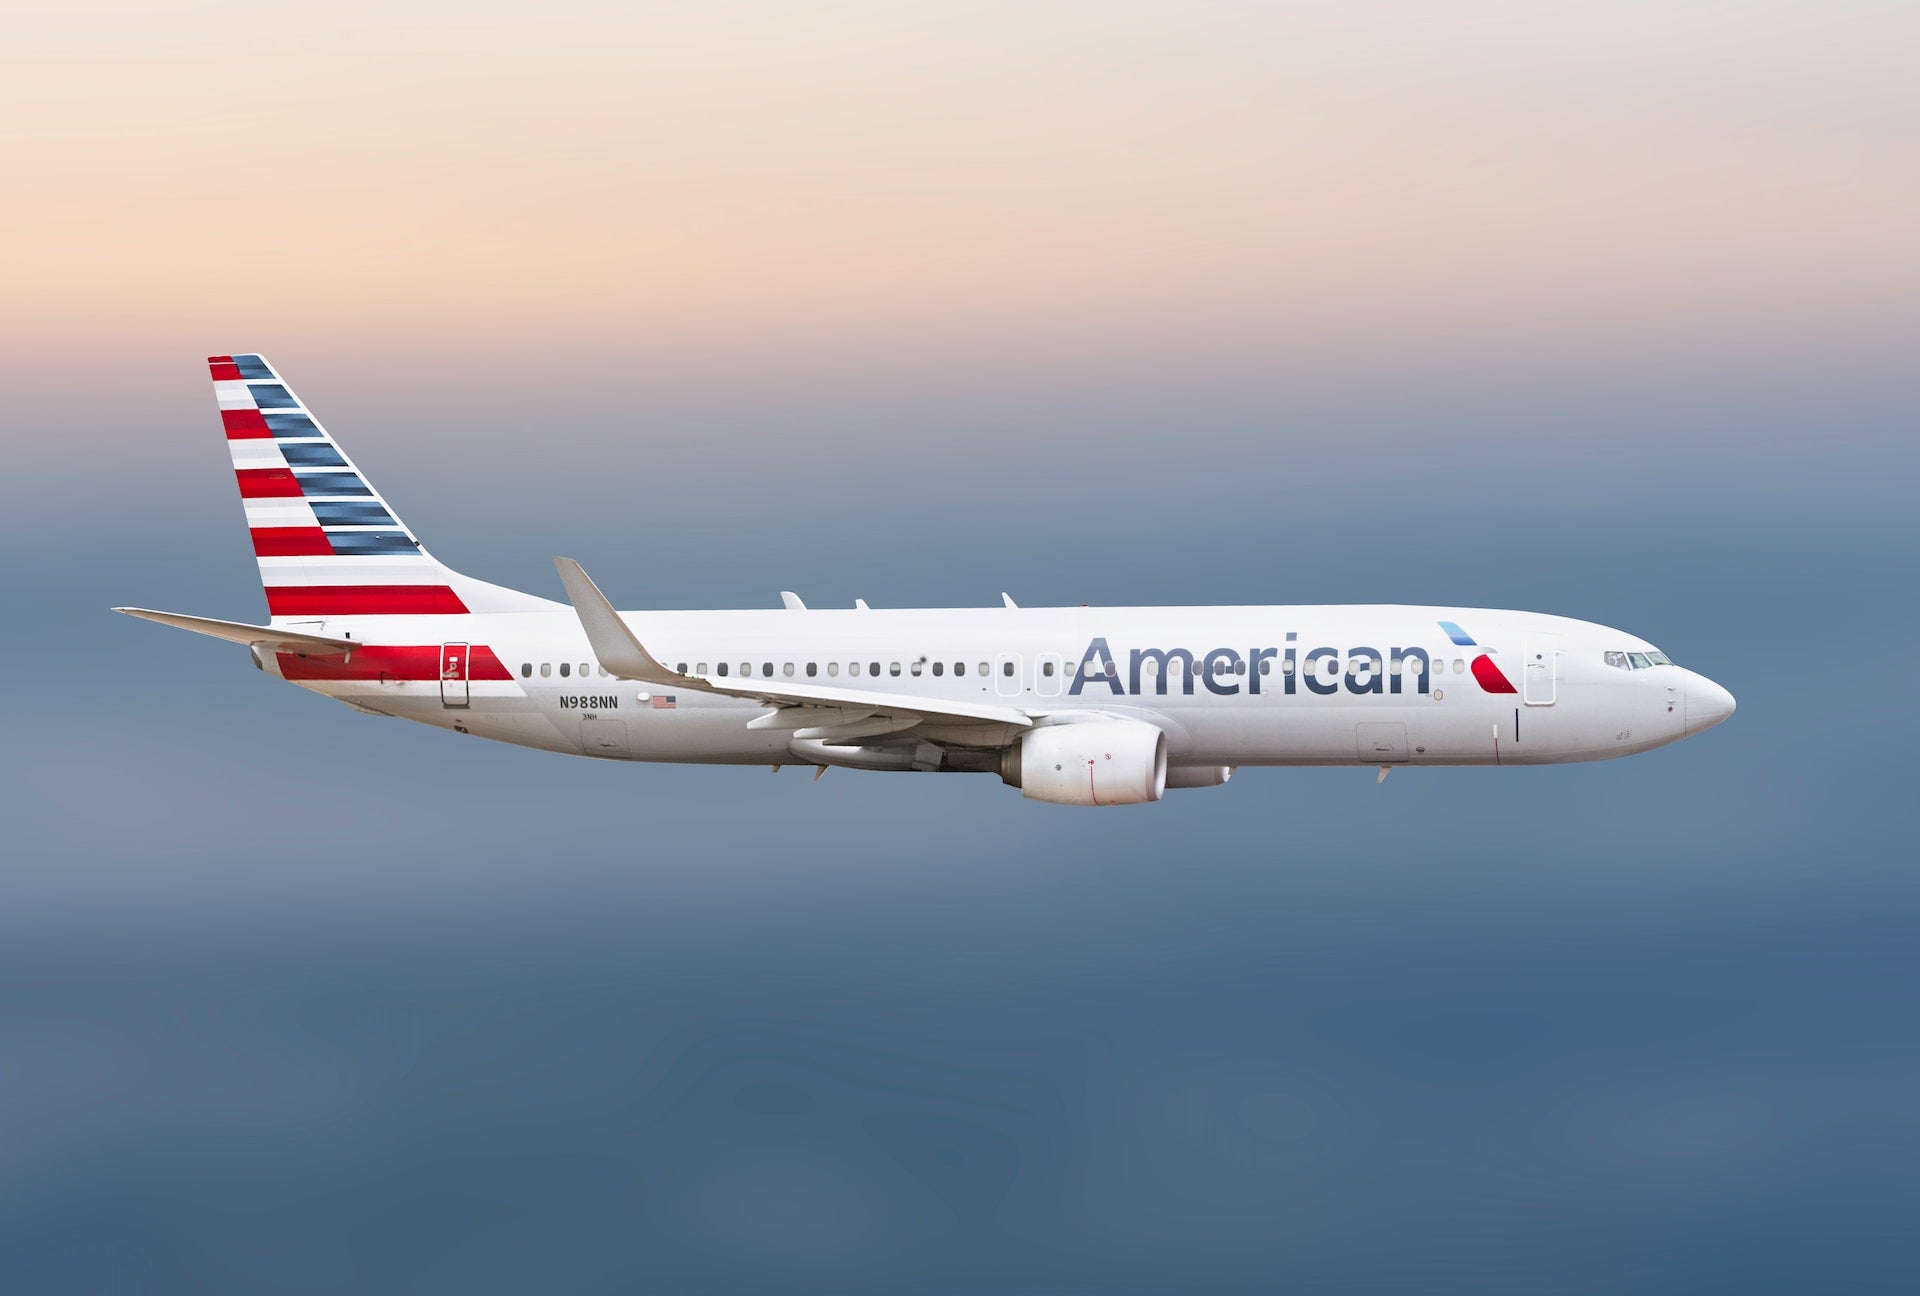 American Airlines Business Extra: How To Earn & Redeem Points